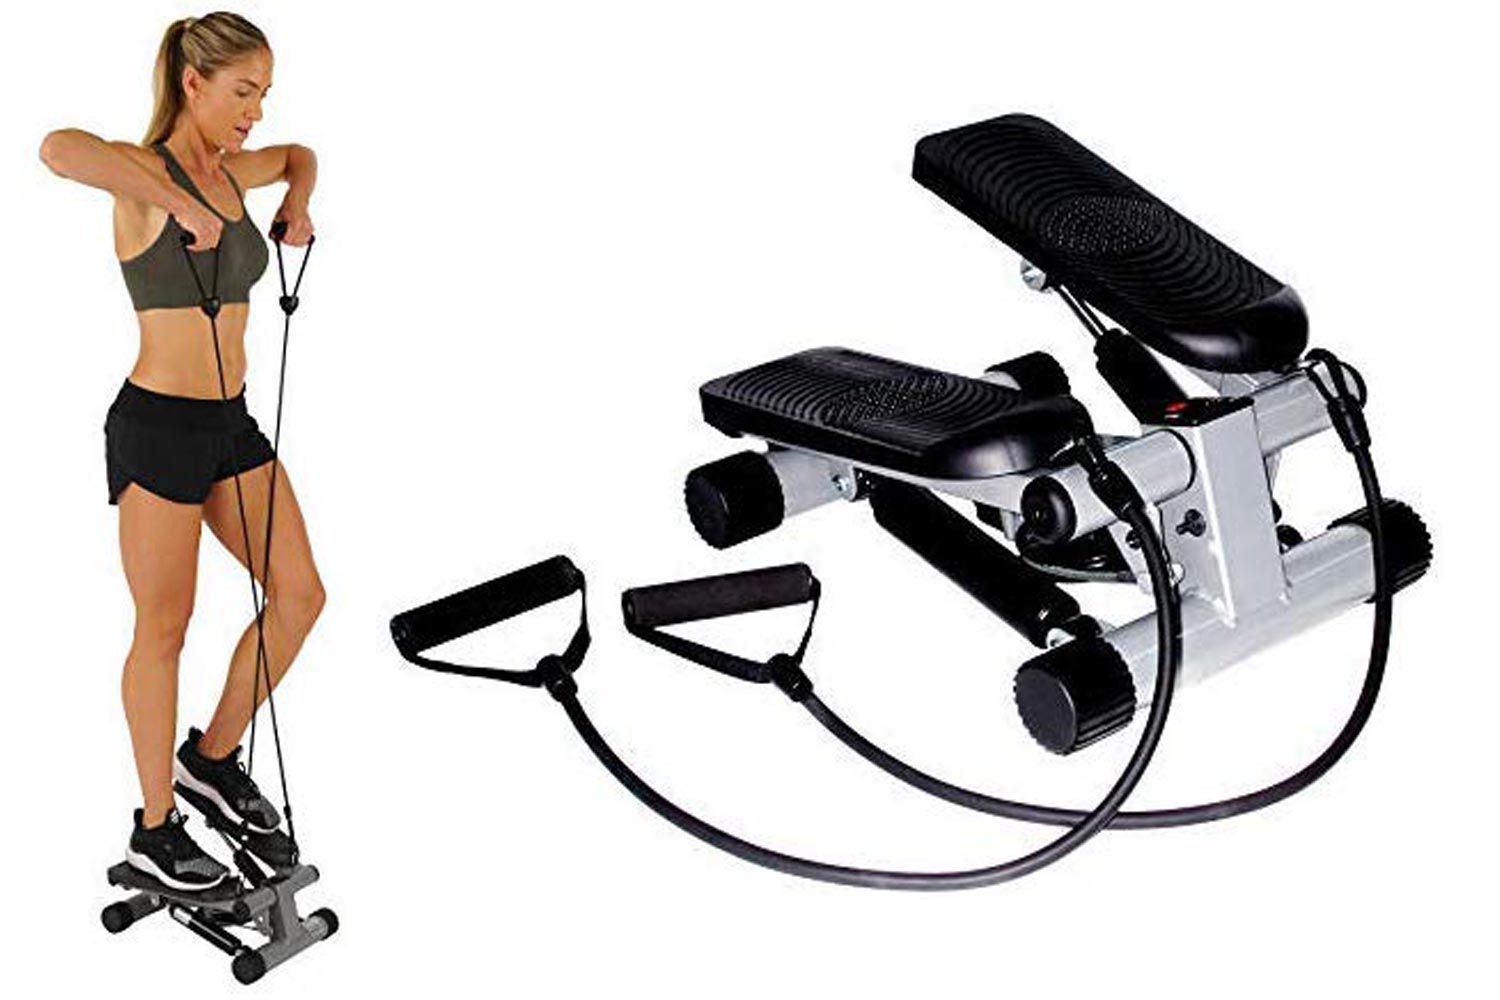 Black Fitness Stepper for Exercise… Exercise Stepper with Resistance Bands for Indoor Workout Mini Stepper Stair Stepper Exercise Machine Including LCD Monitor